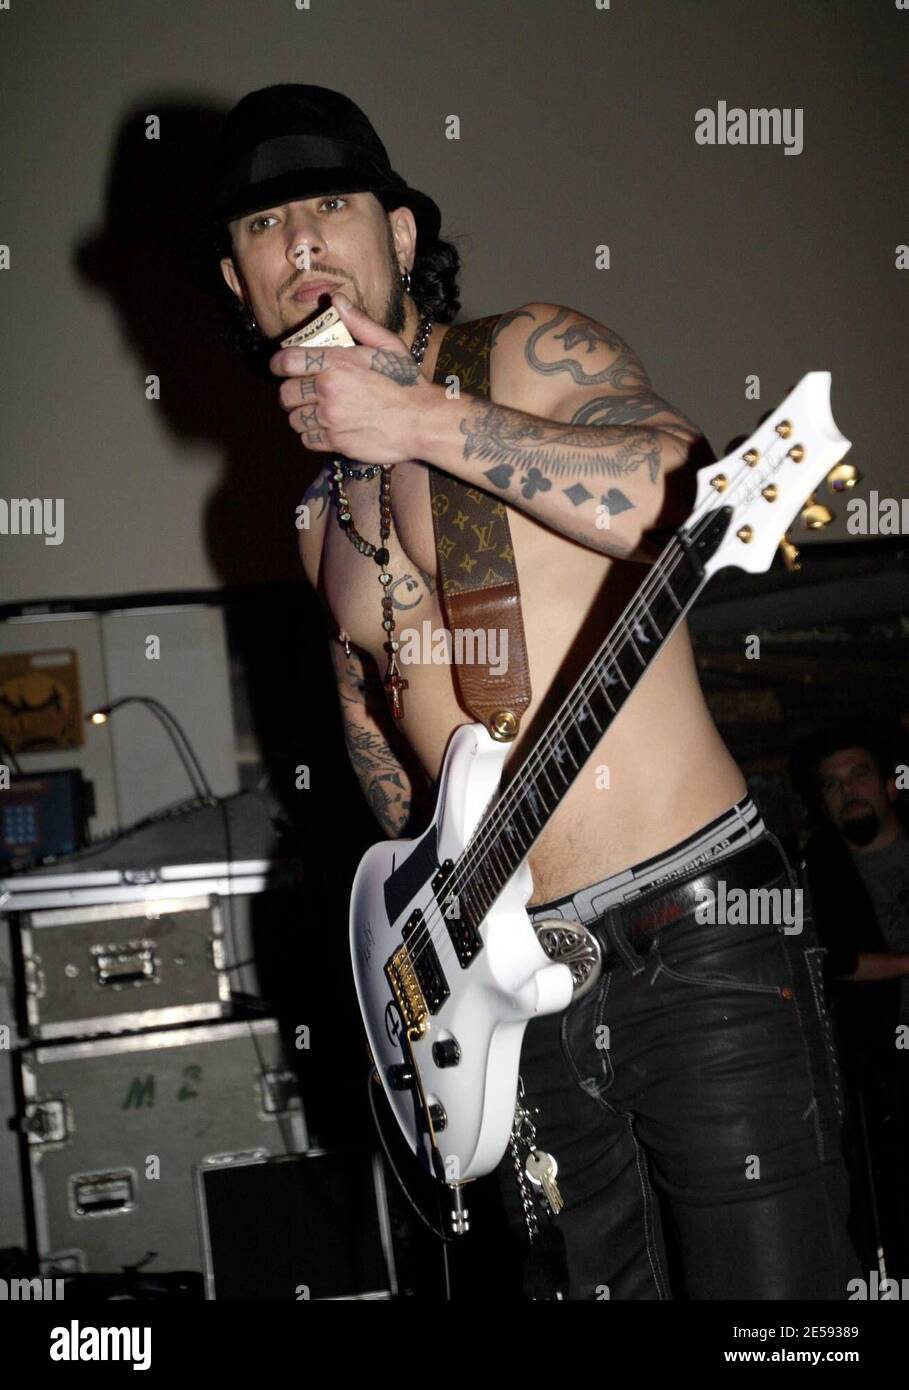 Dave Navarro and DJ Skribble perform live at The Pawn Shop Lounge. Navarro  was very stylish with his Louis Vuitton guitar strap and as usual, seemed  to love all the female attention